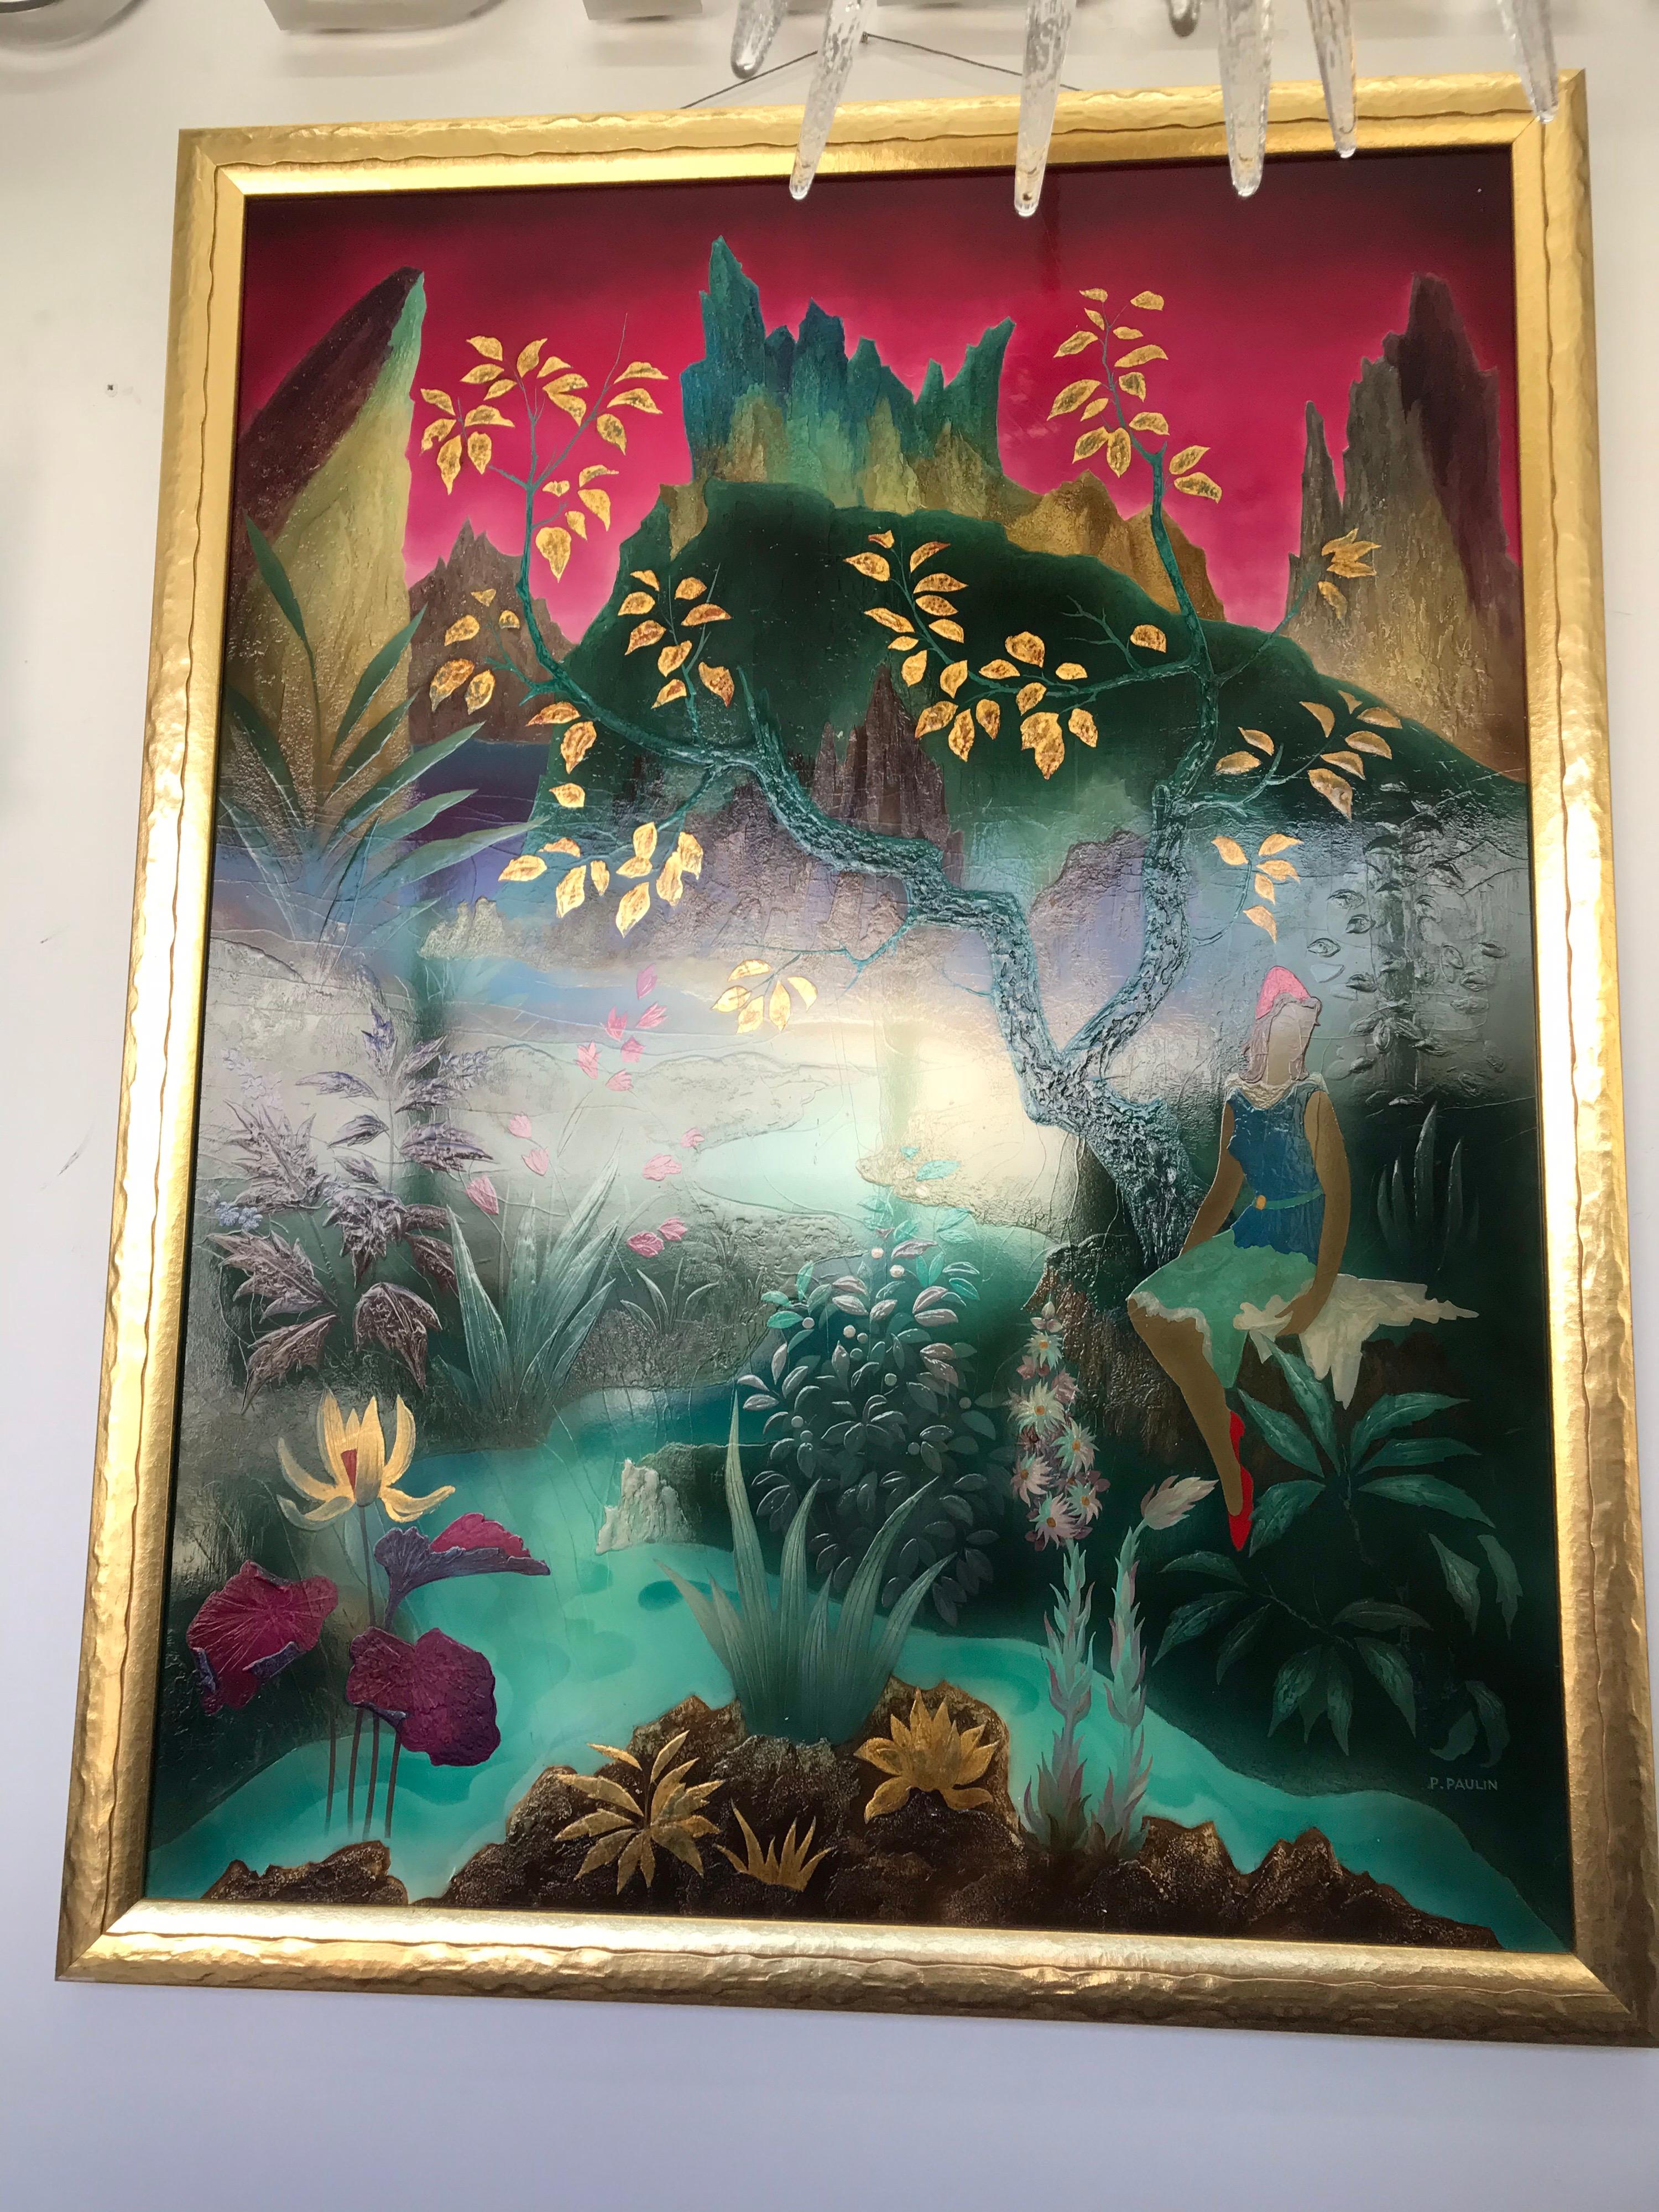 Large Spectacular French Lacquer Painting by Pierre Paulin 1